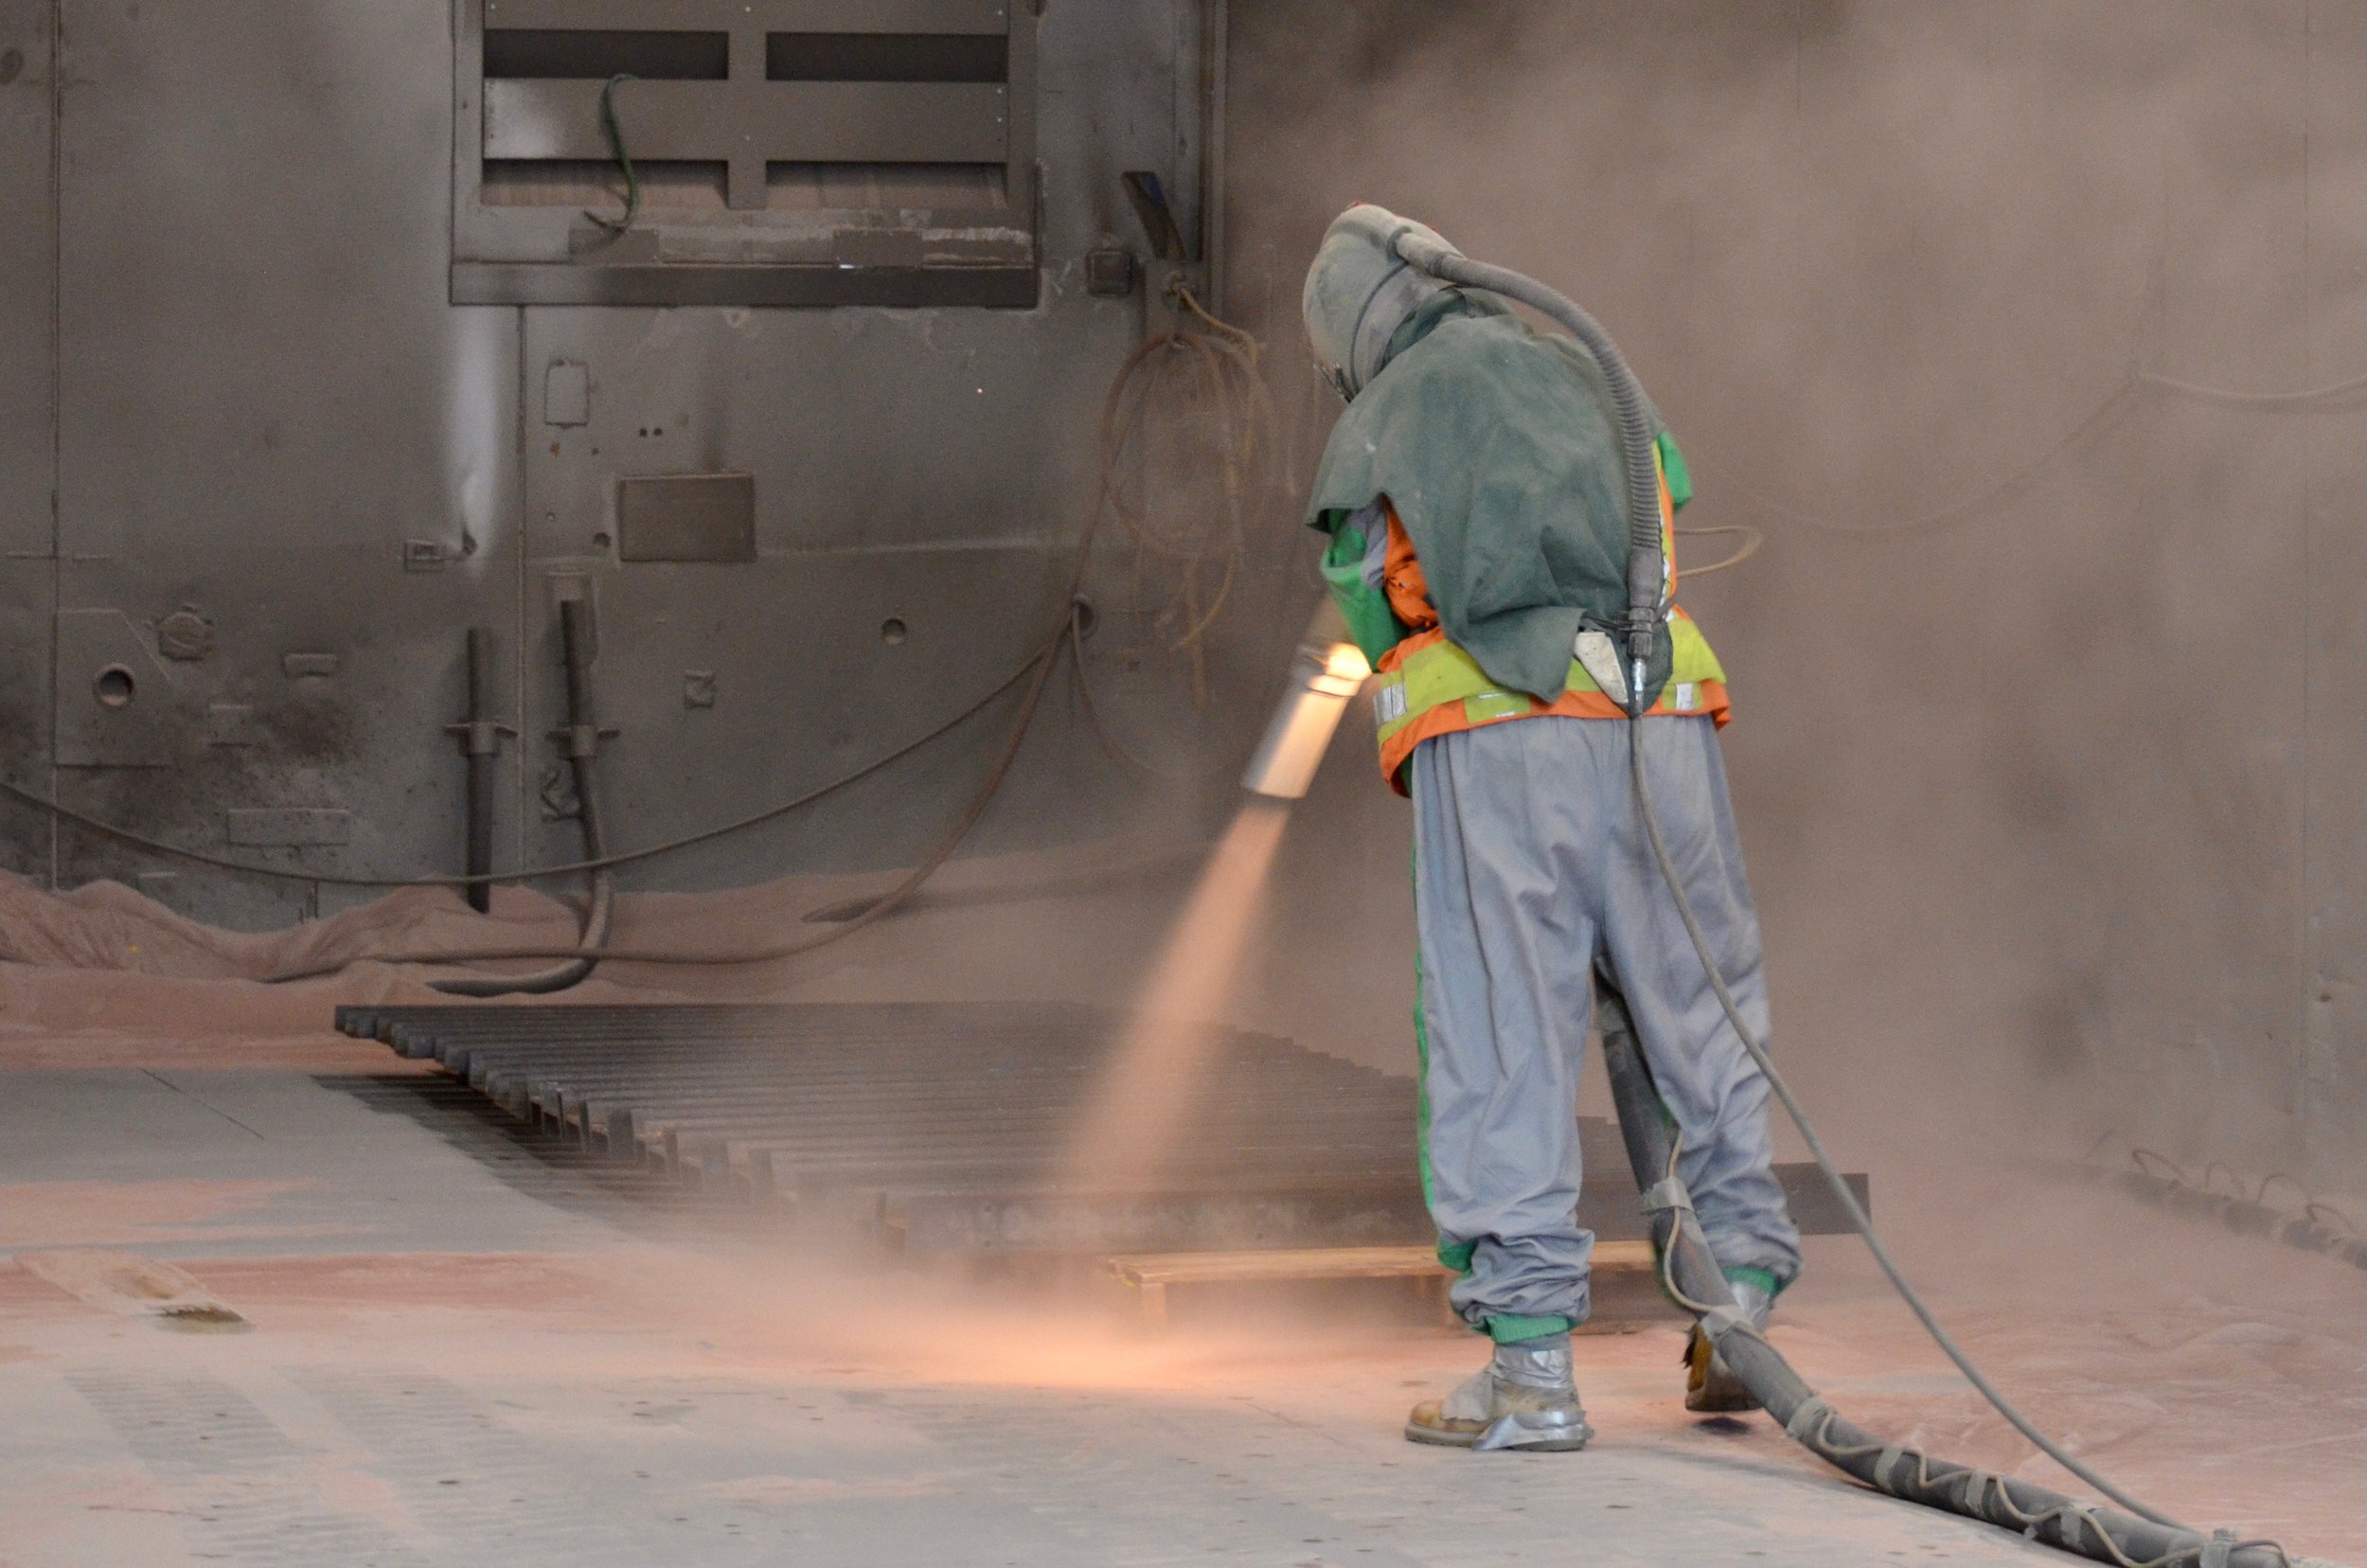 Our truck body Sandblasters clean any impurities or paint from steel for trucks.